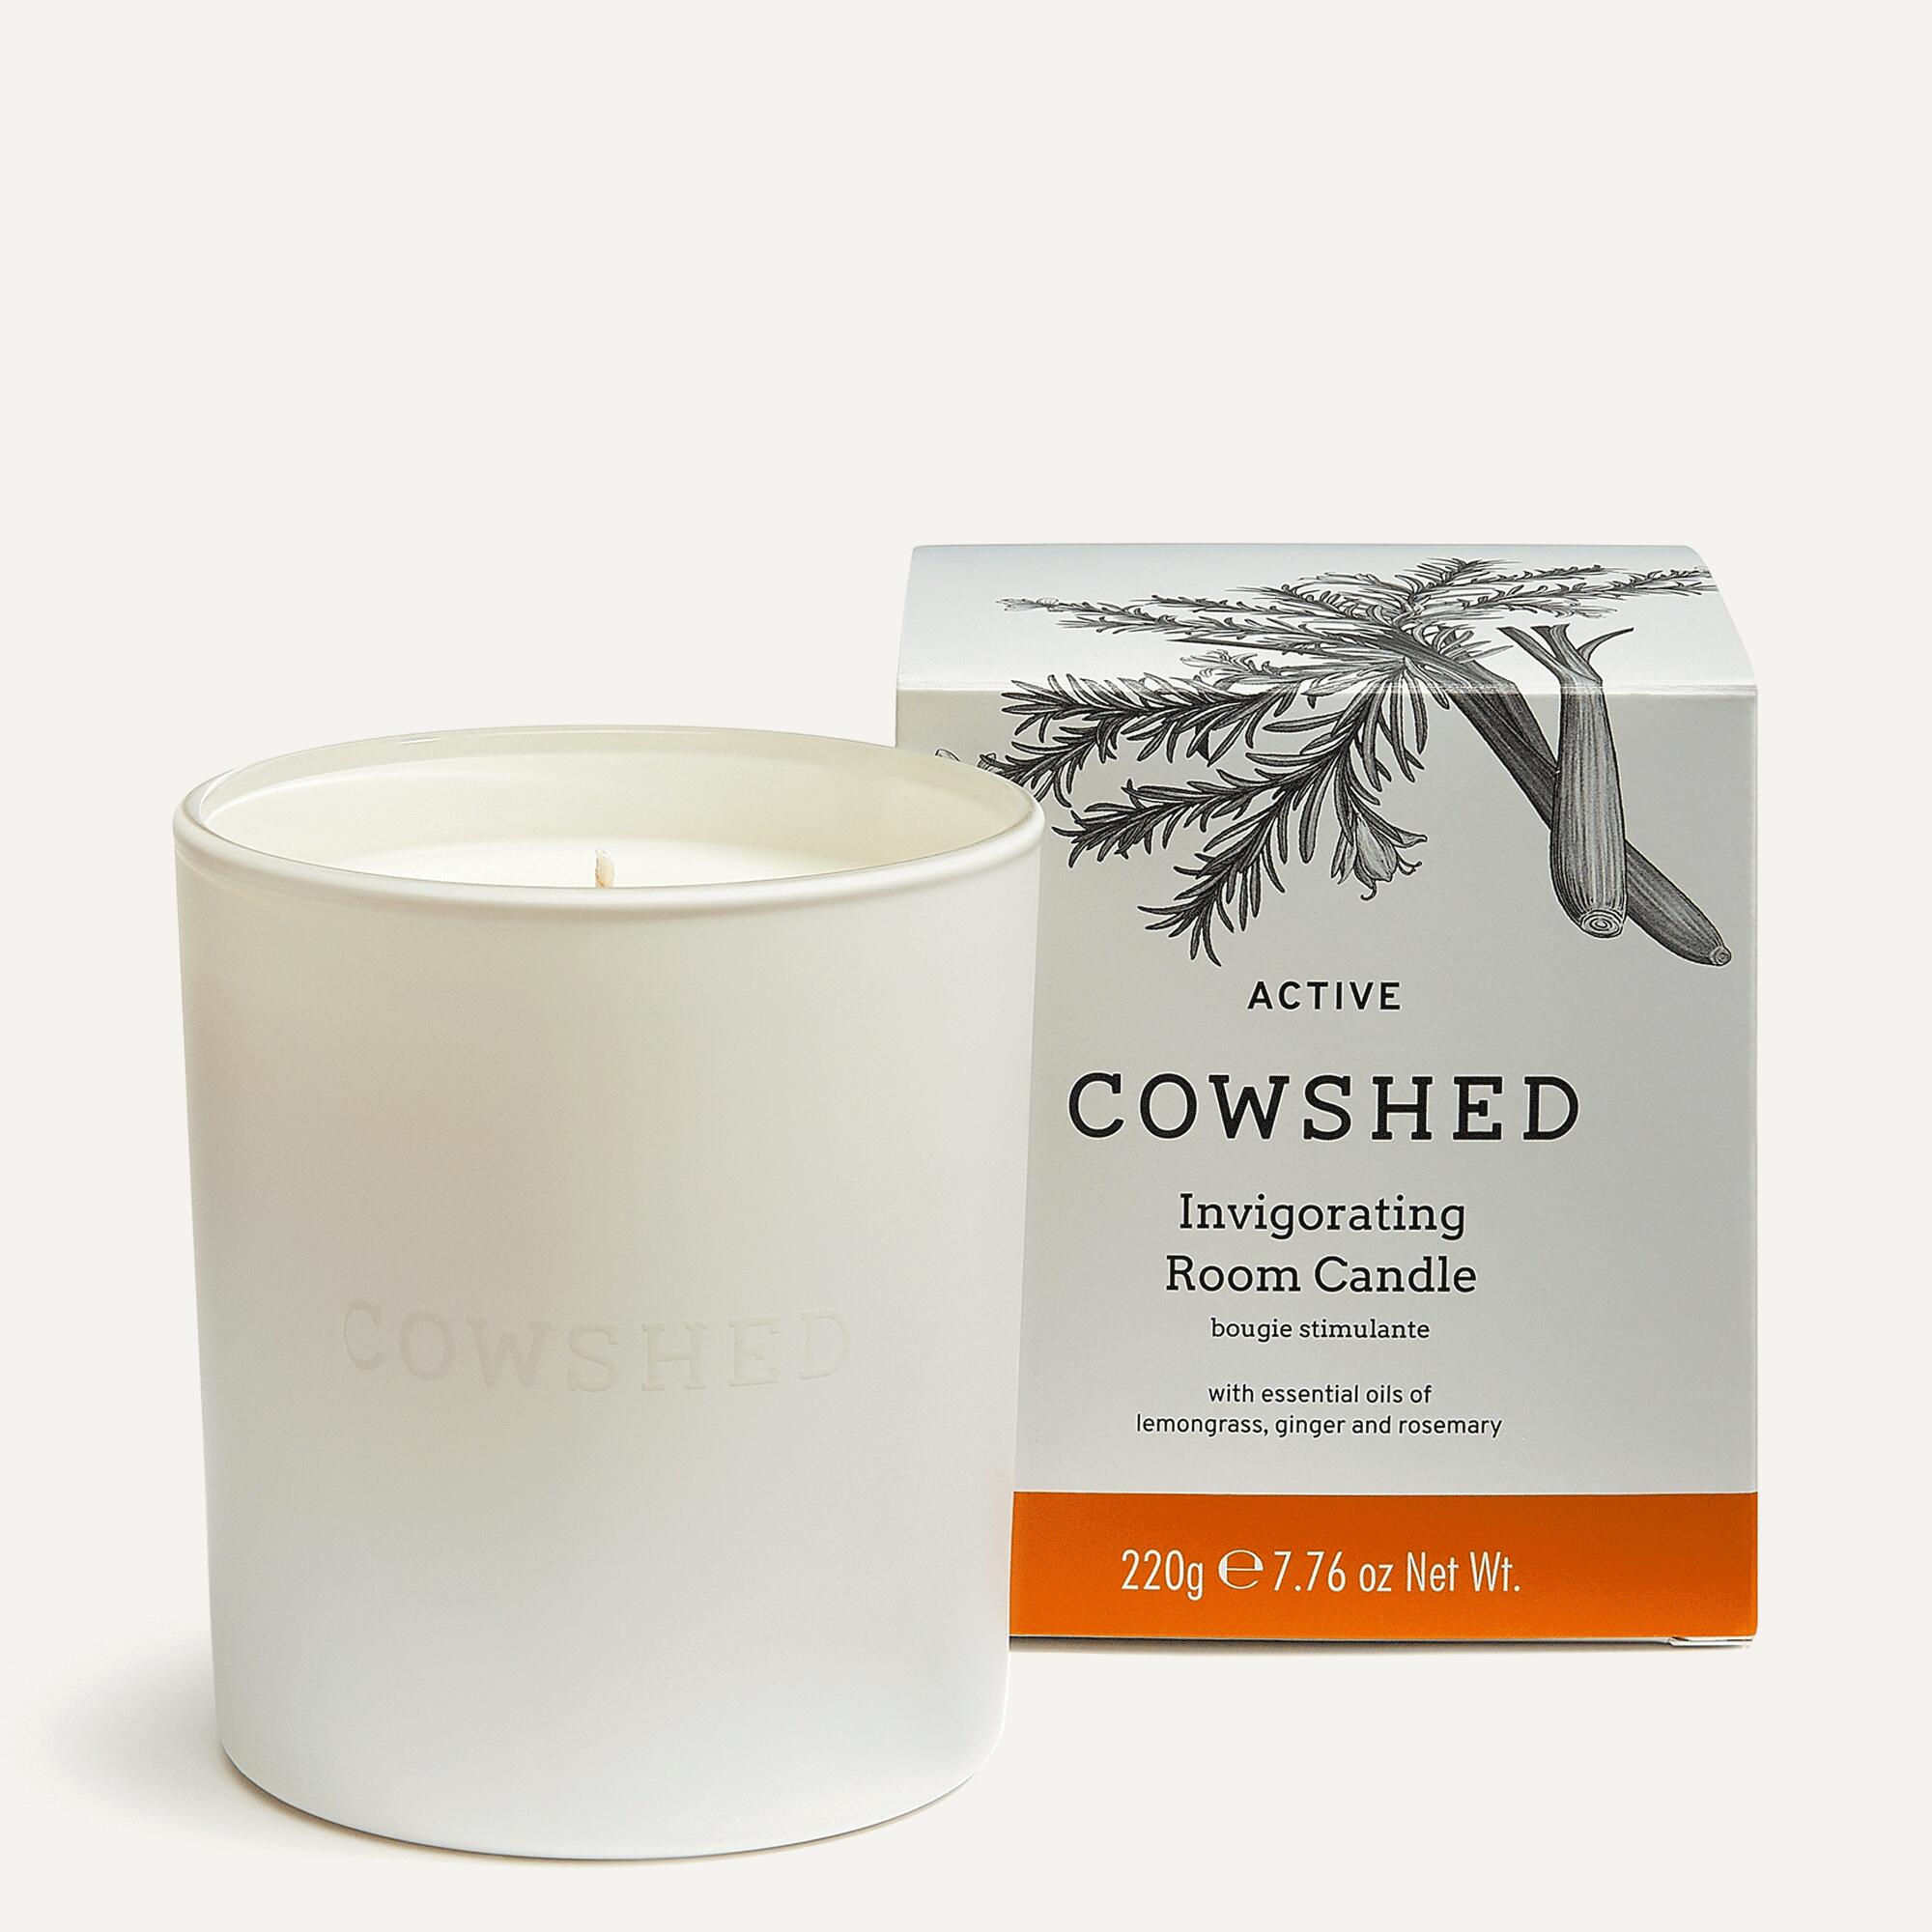 Cowshed-Active-Invigorating-Room-Candle-220g